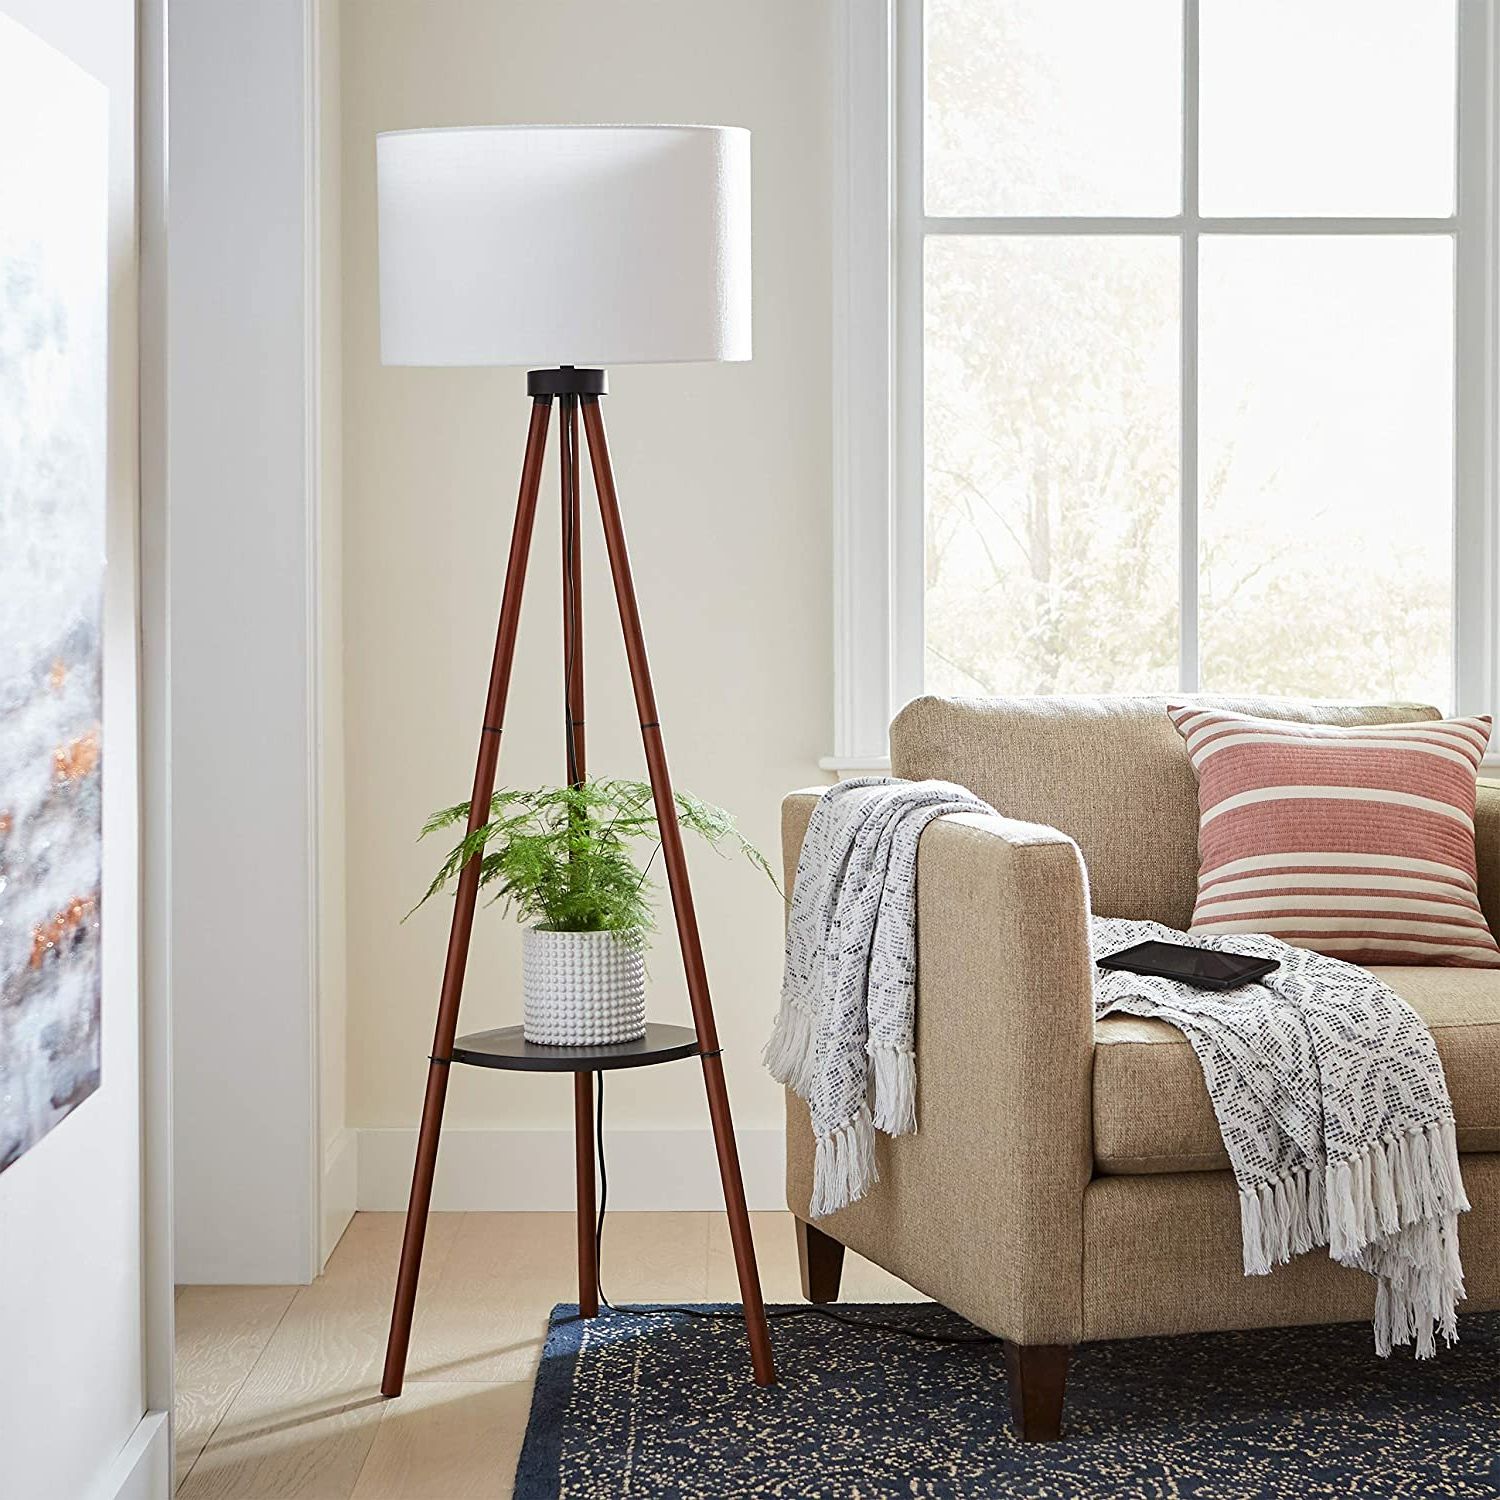 George Oliver Asberry 61" Led Tripod Floor Lamp & Reviews | Wayfair Intended For Wood Tripod Floor Lamps (View 10 of 20)